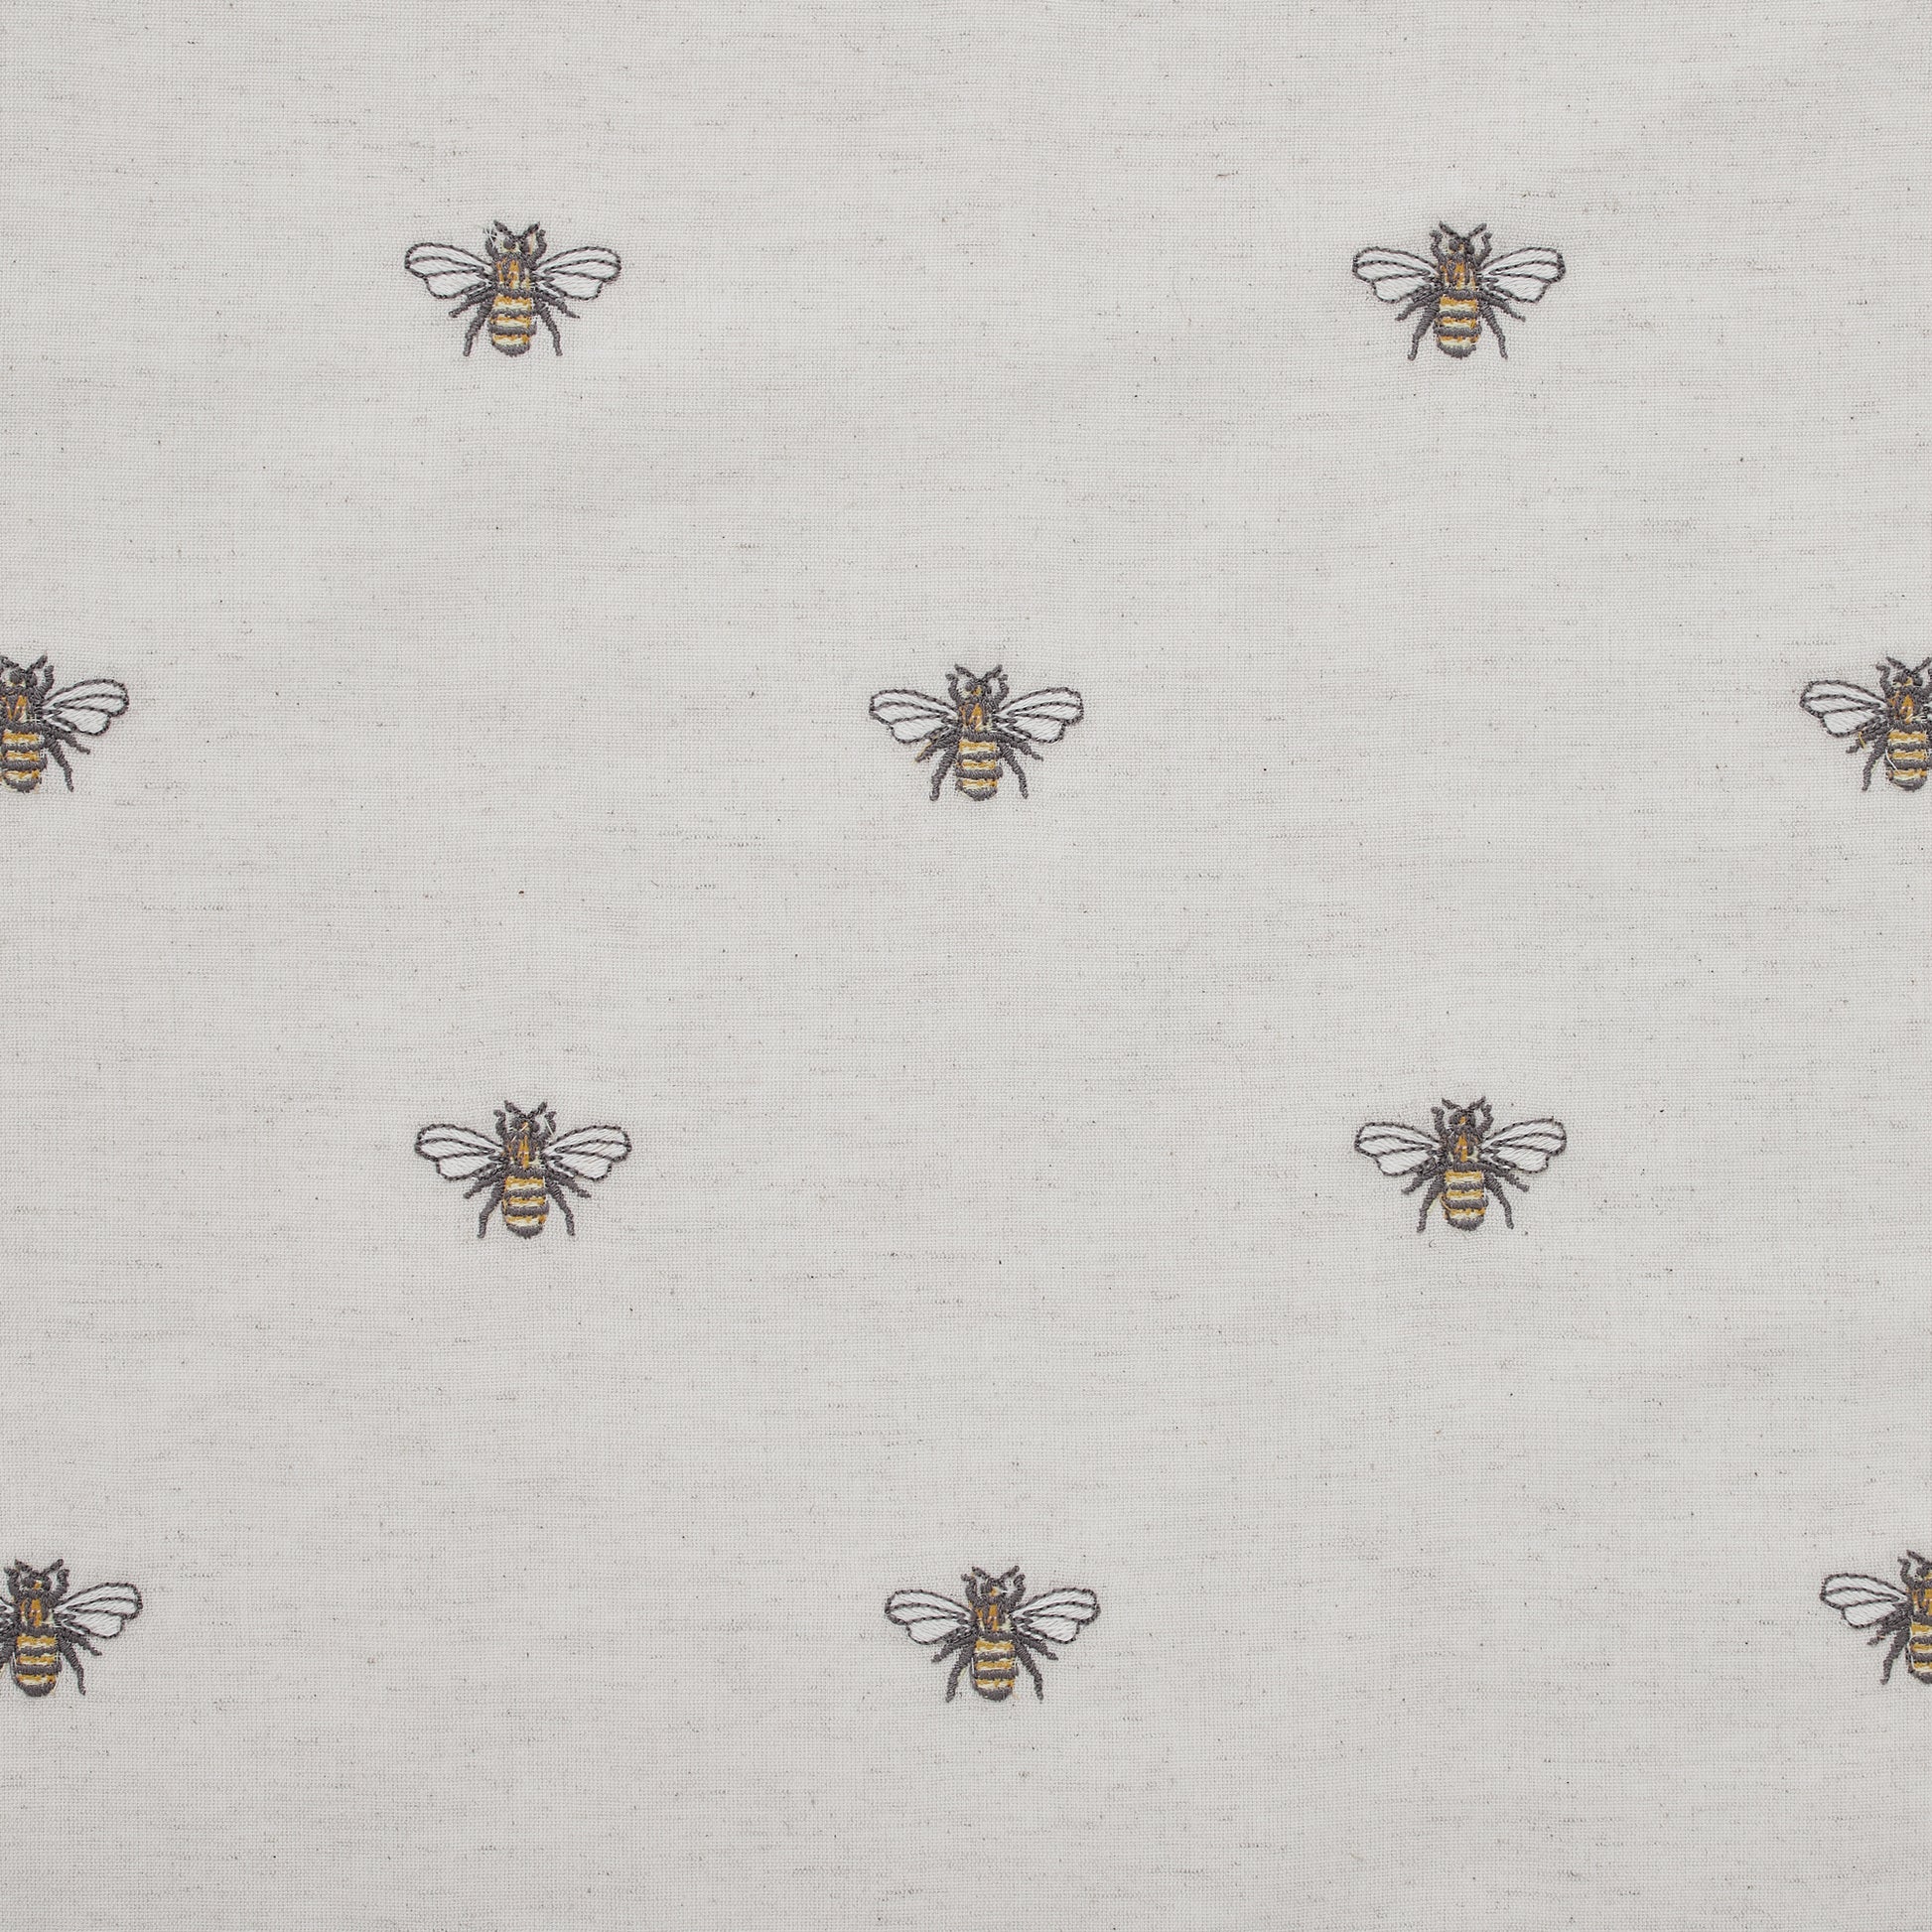 81268-Embroidered-Bee-Placemat-Set-of-6-12x18-image-5